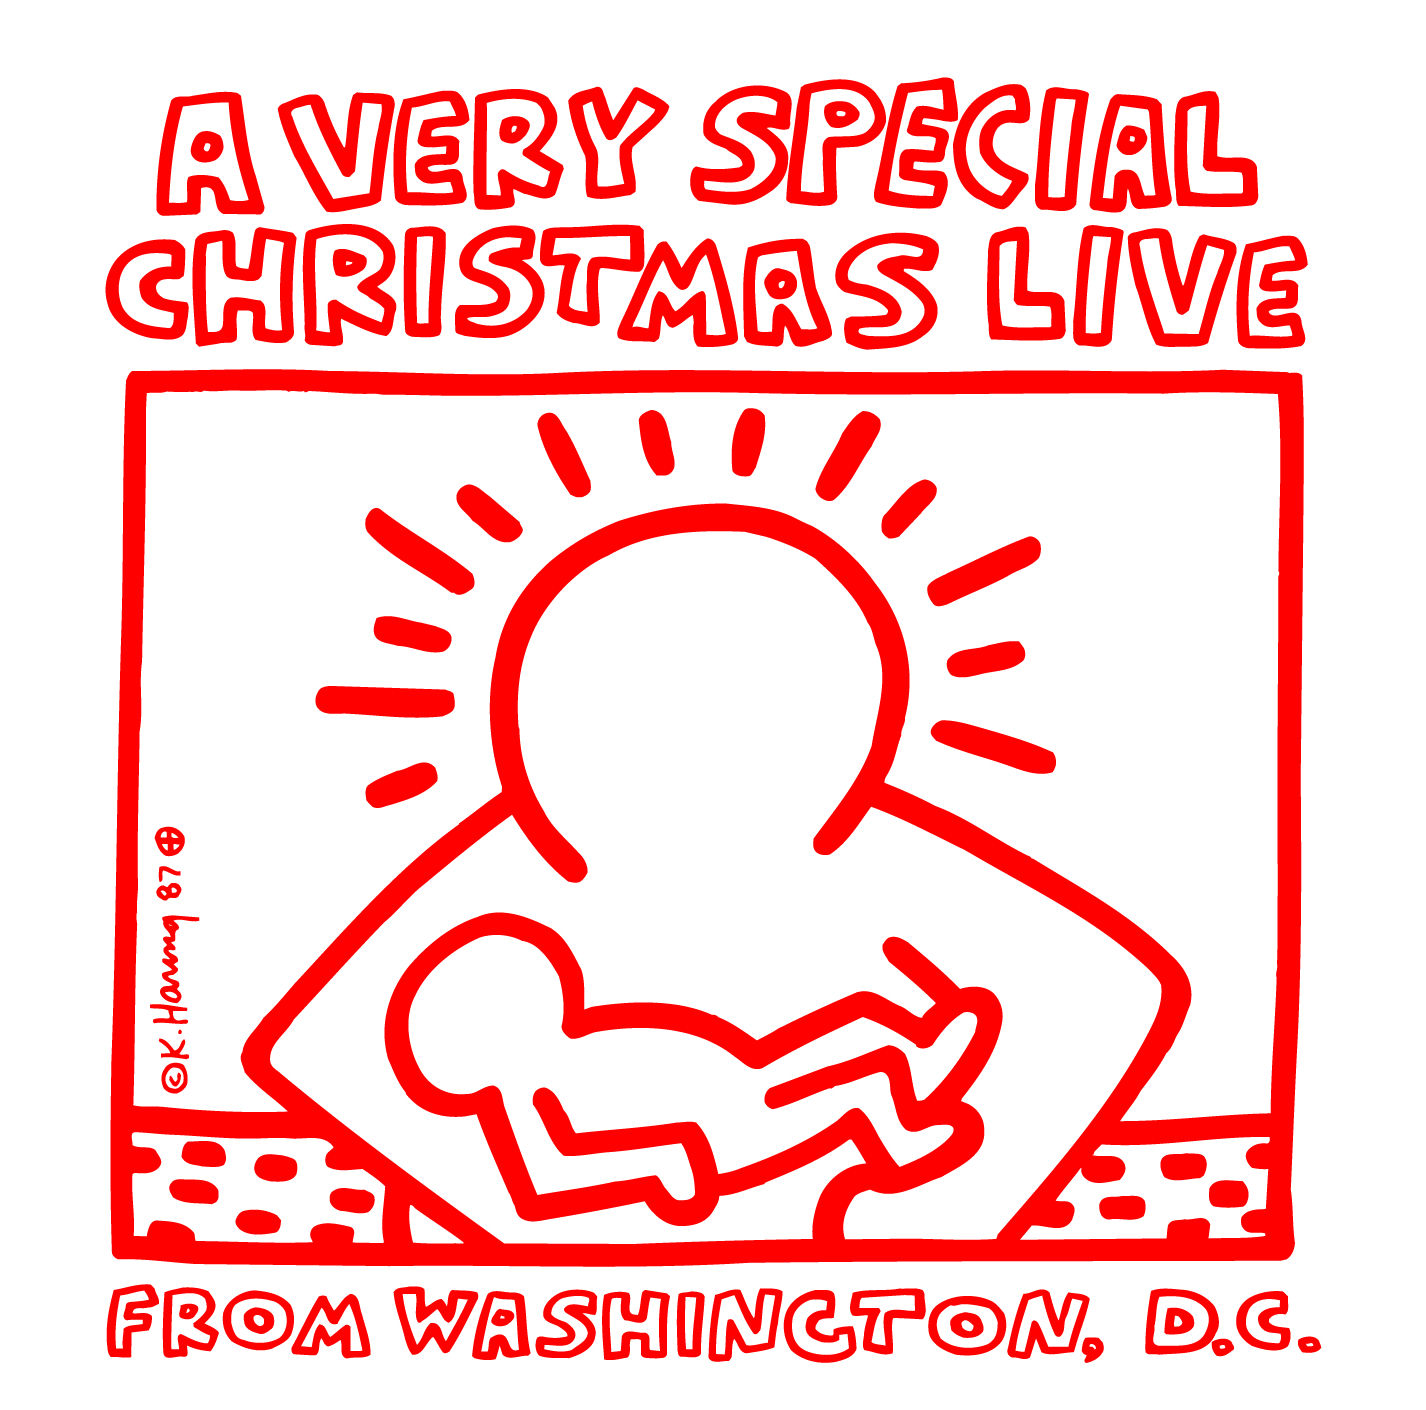 A Very Special Christmas Live From Washington, D.C. 